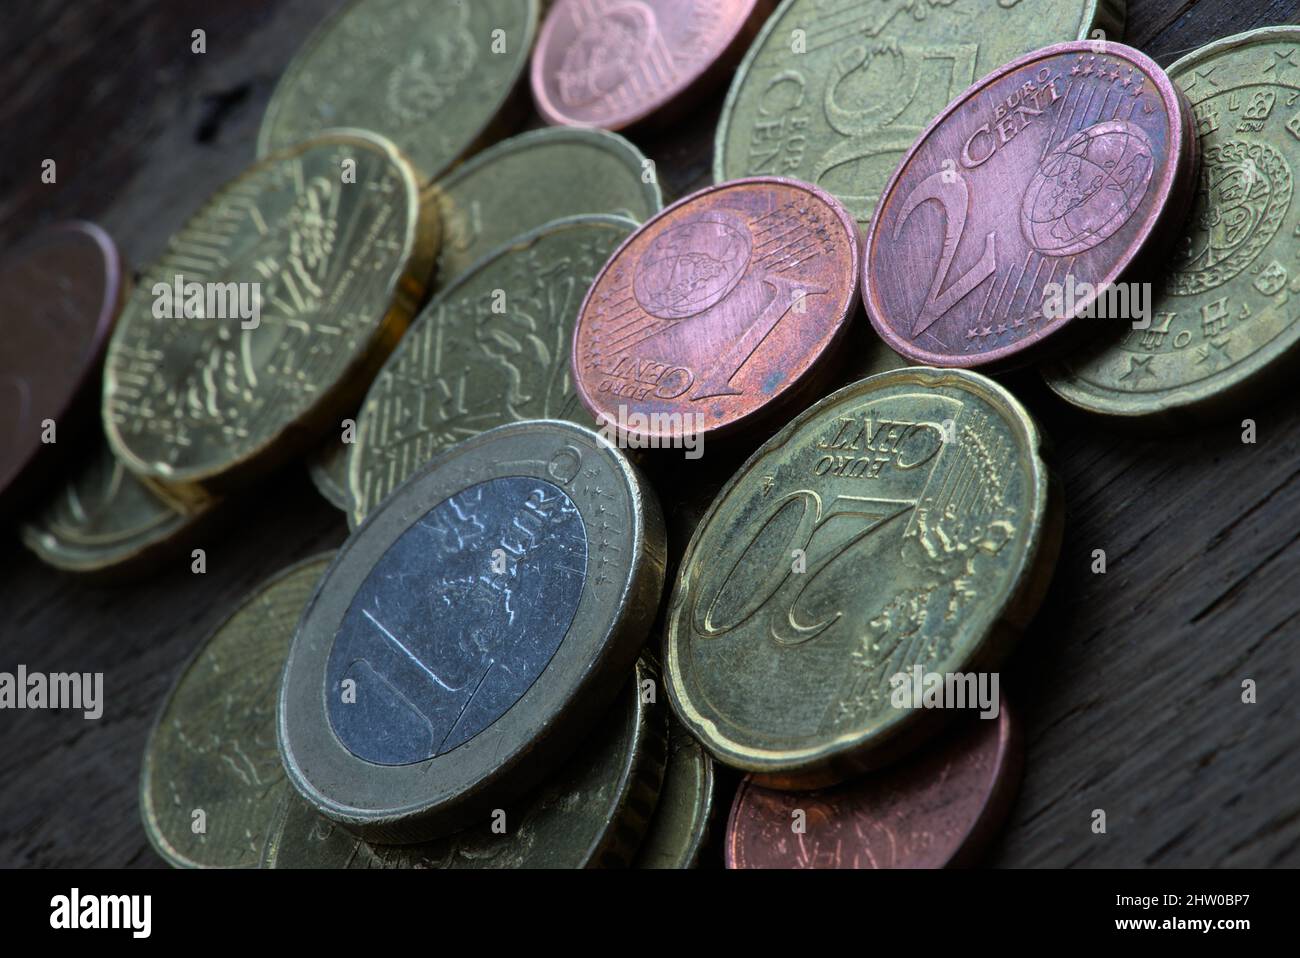 small coppered euro cent coin Stock Photo